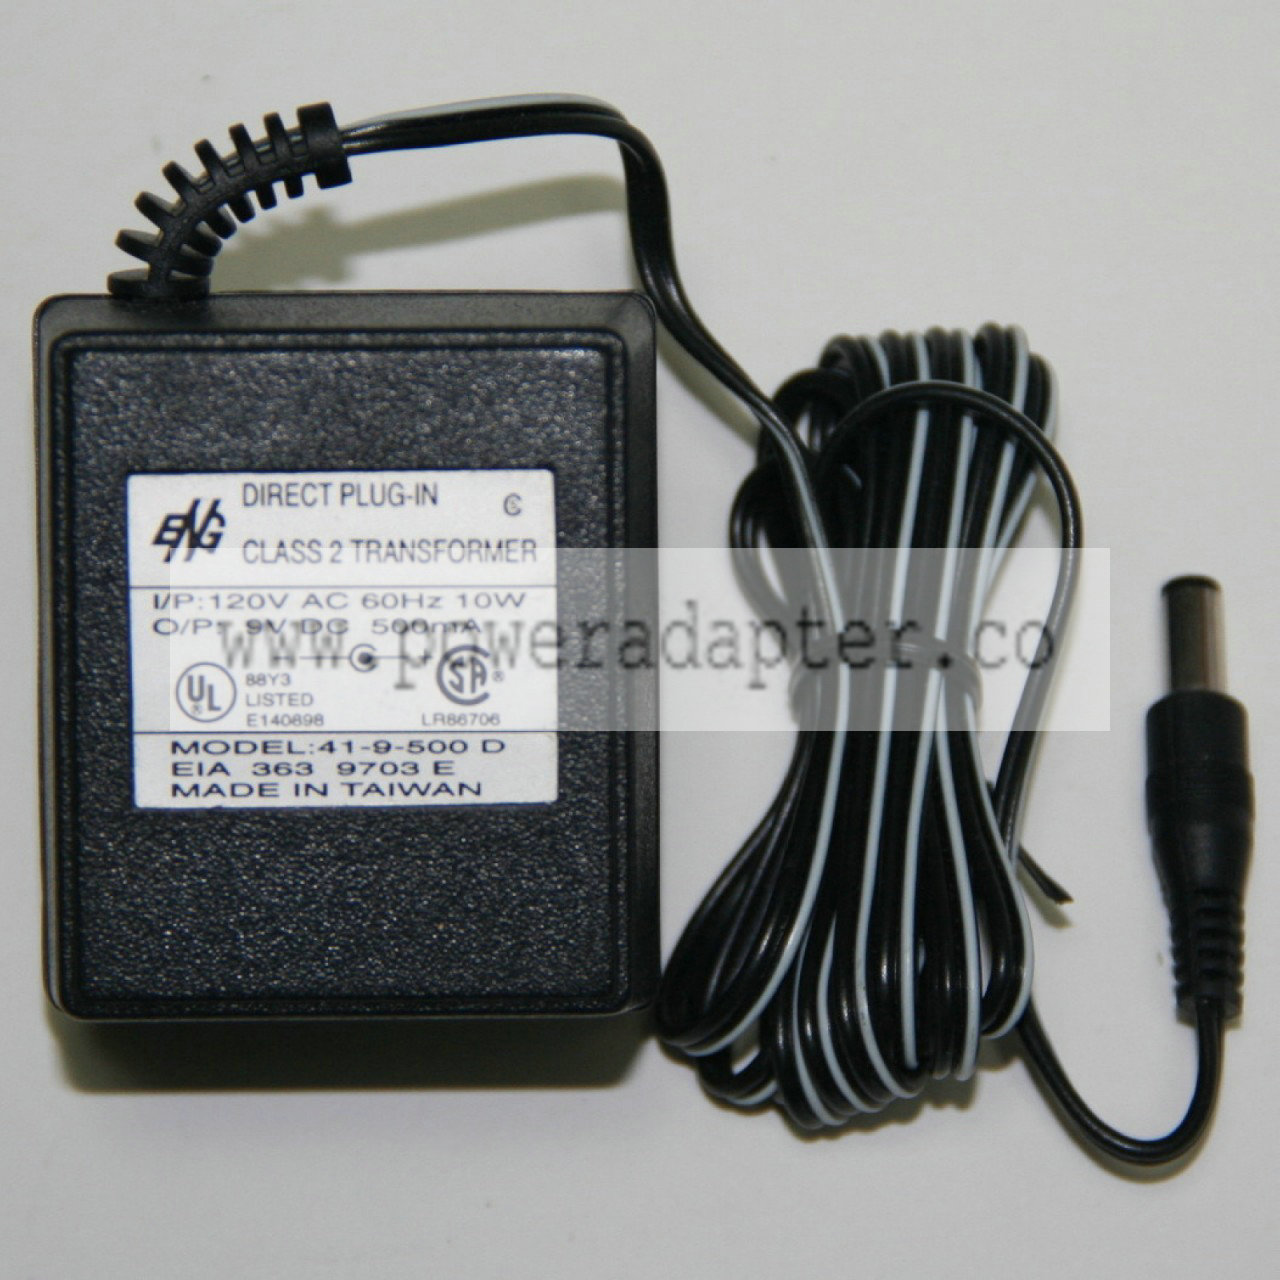 Numark 41-9-500D Power Adapter for some mixers, 9vDC Product Description Numark Power Adapter for some mixers and ot